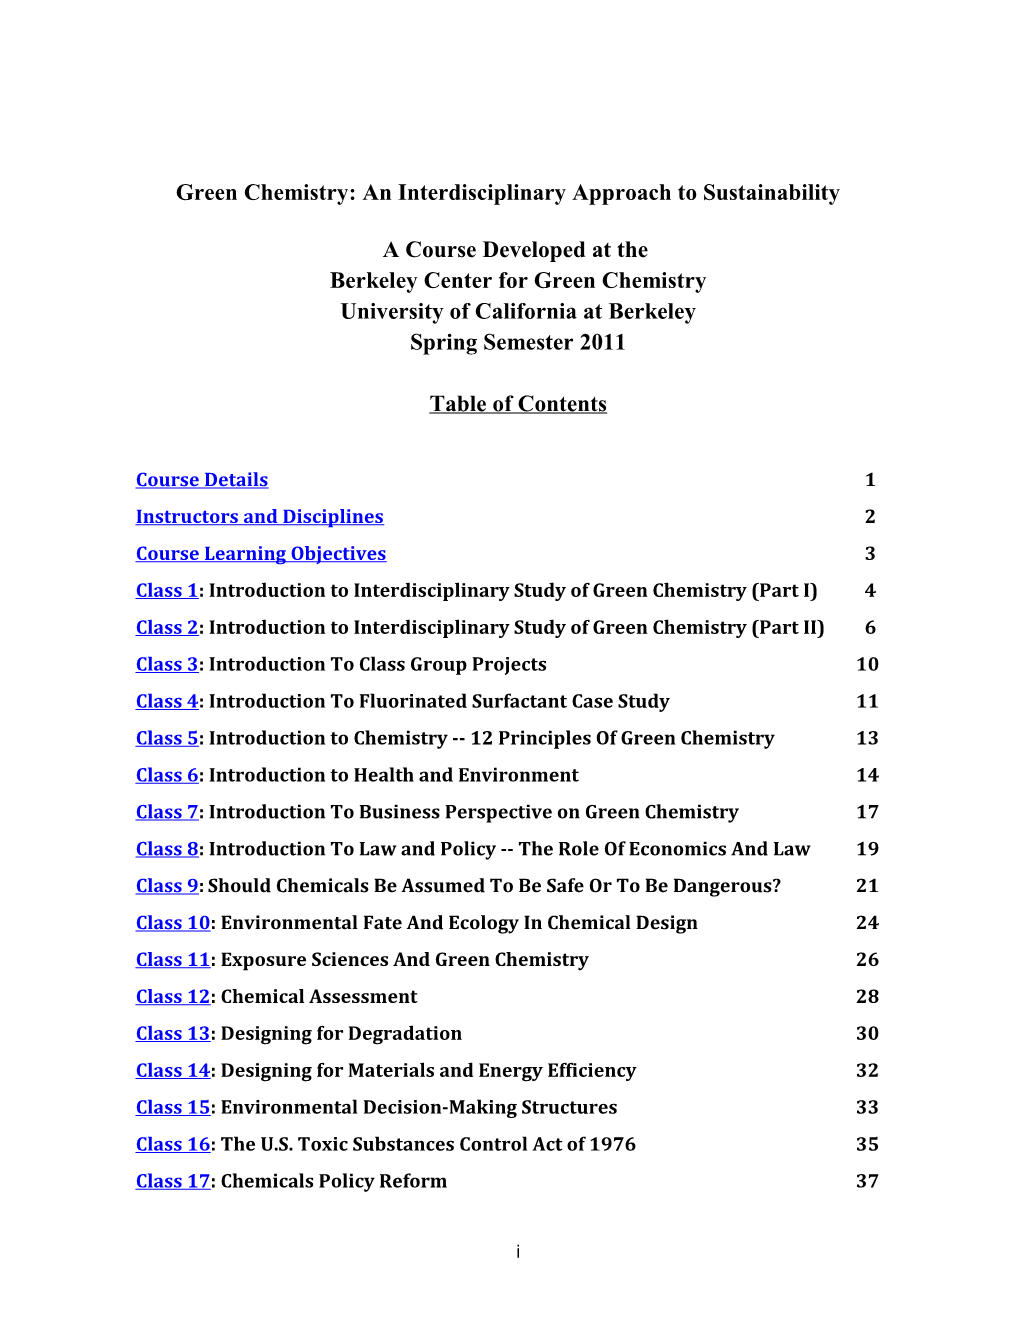 Green Chemistry: an Interdisciplinary Approach to Sustainability